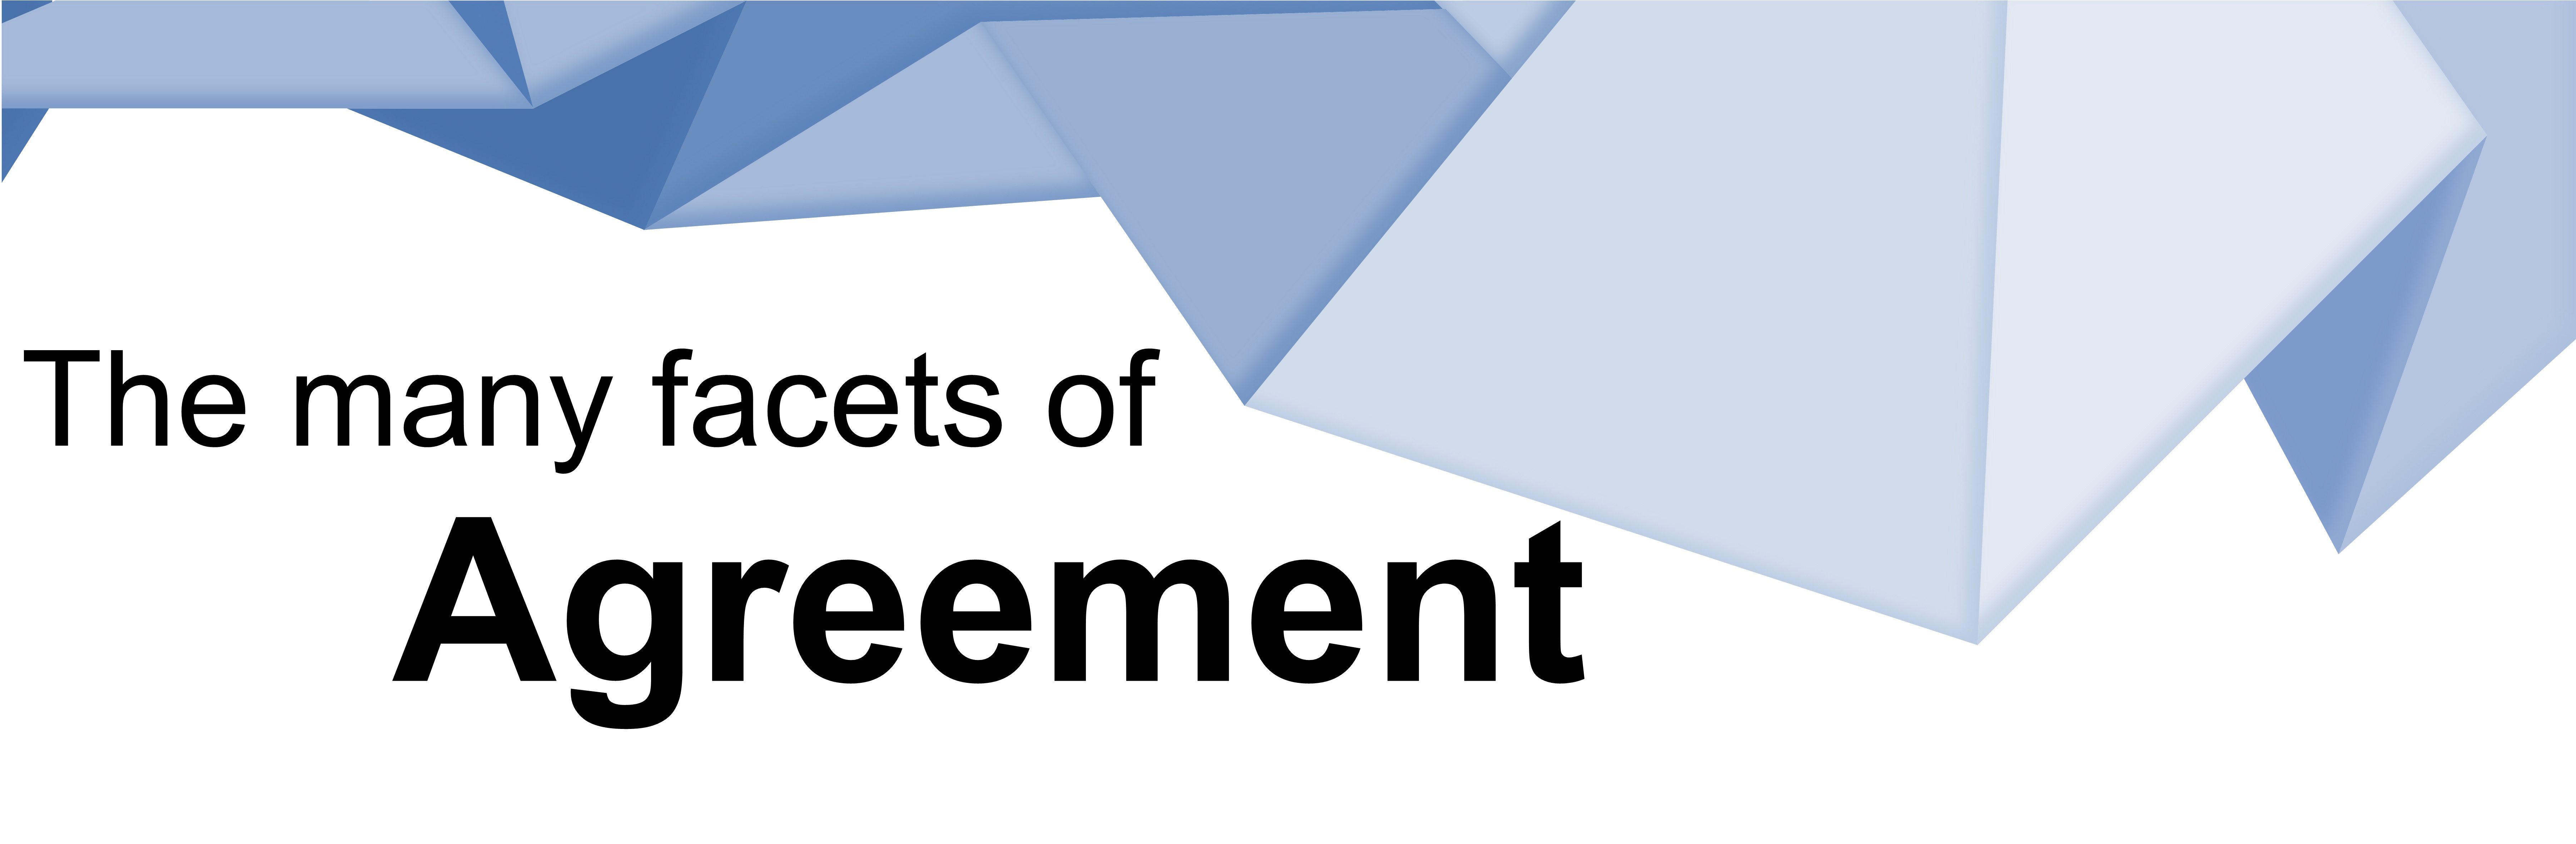 The many facets of Agreement